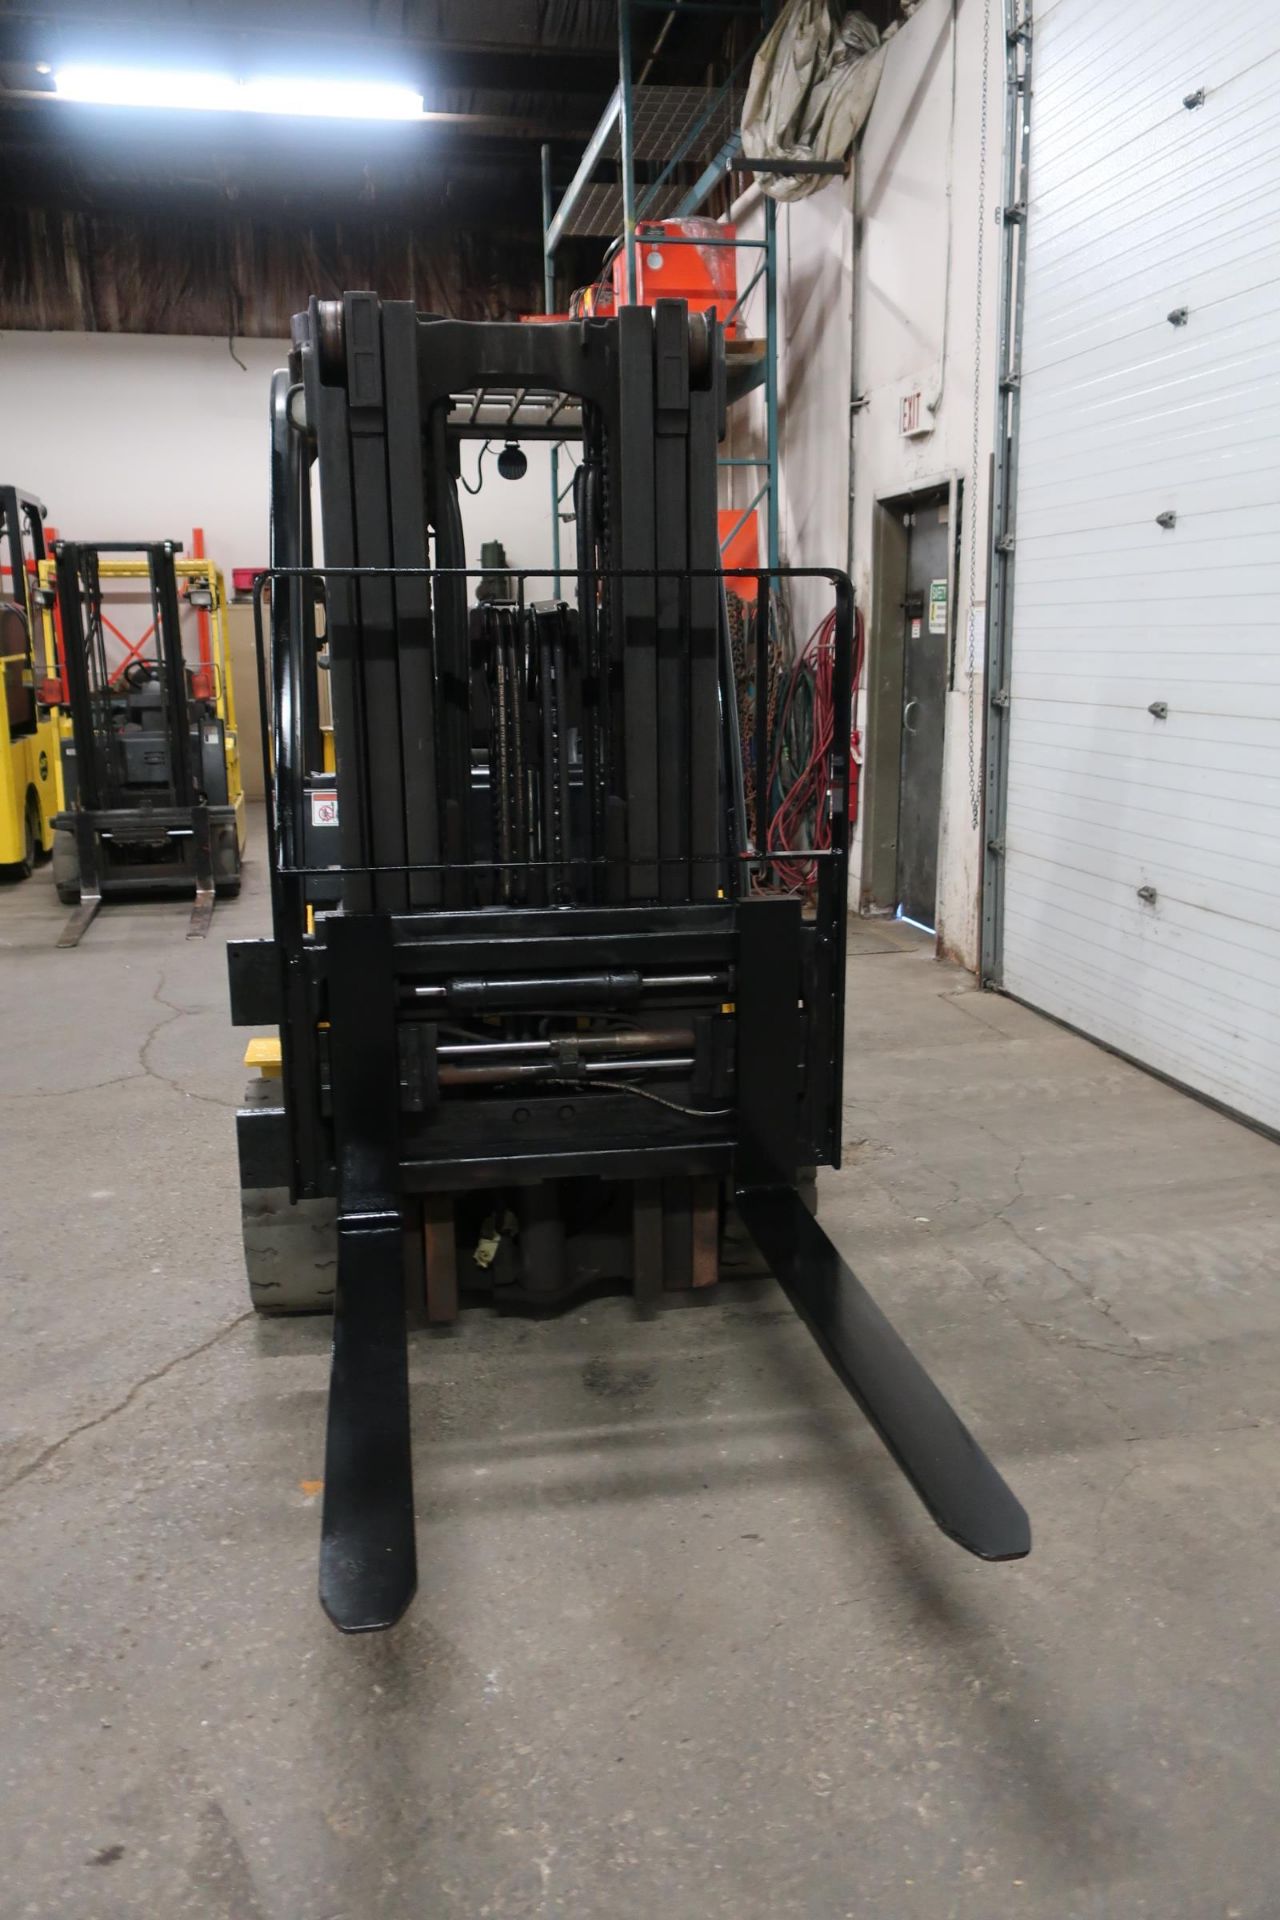 FREE CUSTOMS - 2012 Yale 8000lbs Capacity Forklift with 3-stage mast - LPG (propane) with - Image 2 of 2